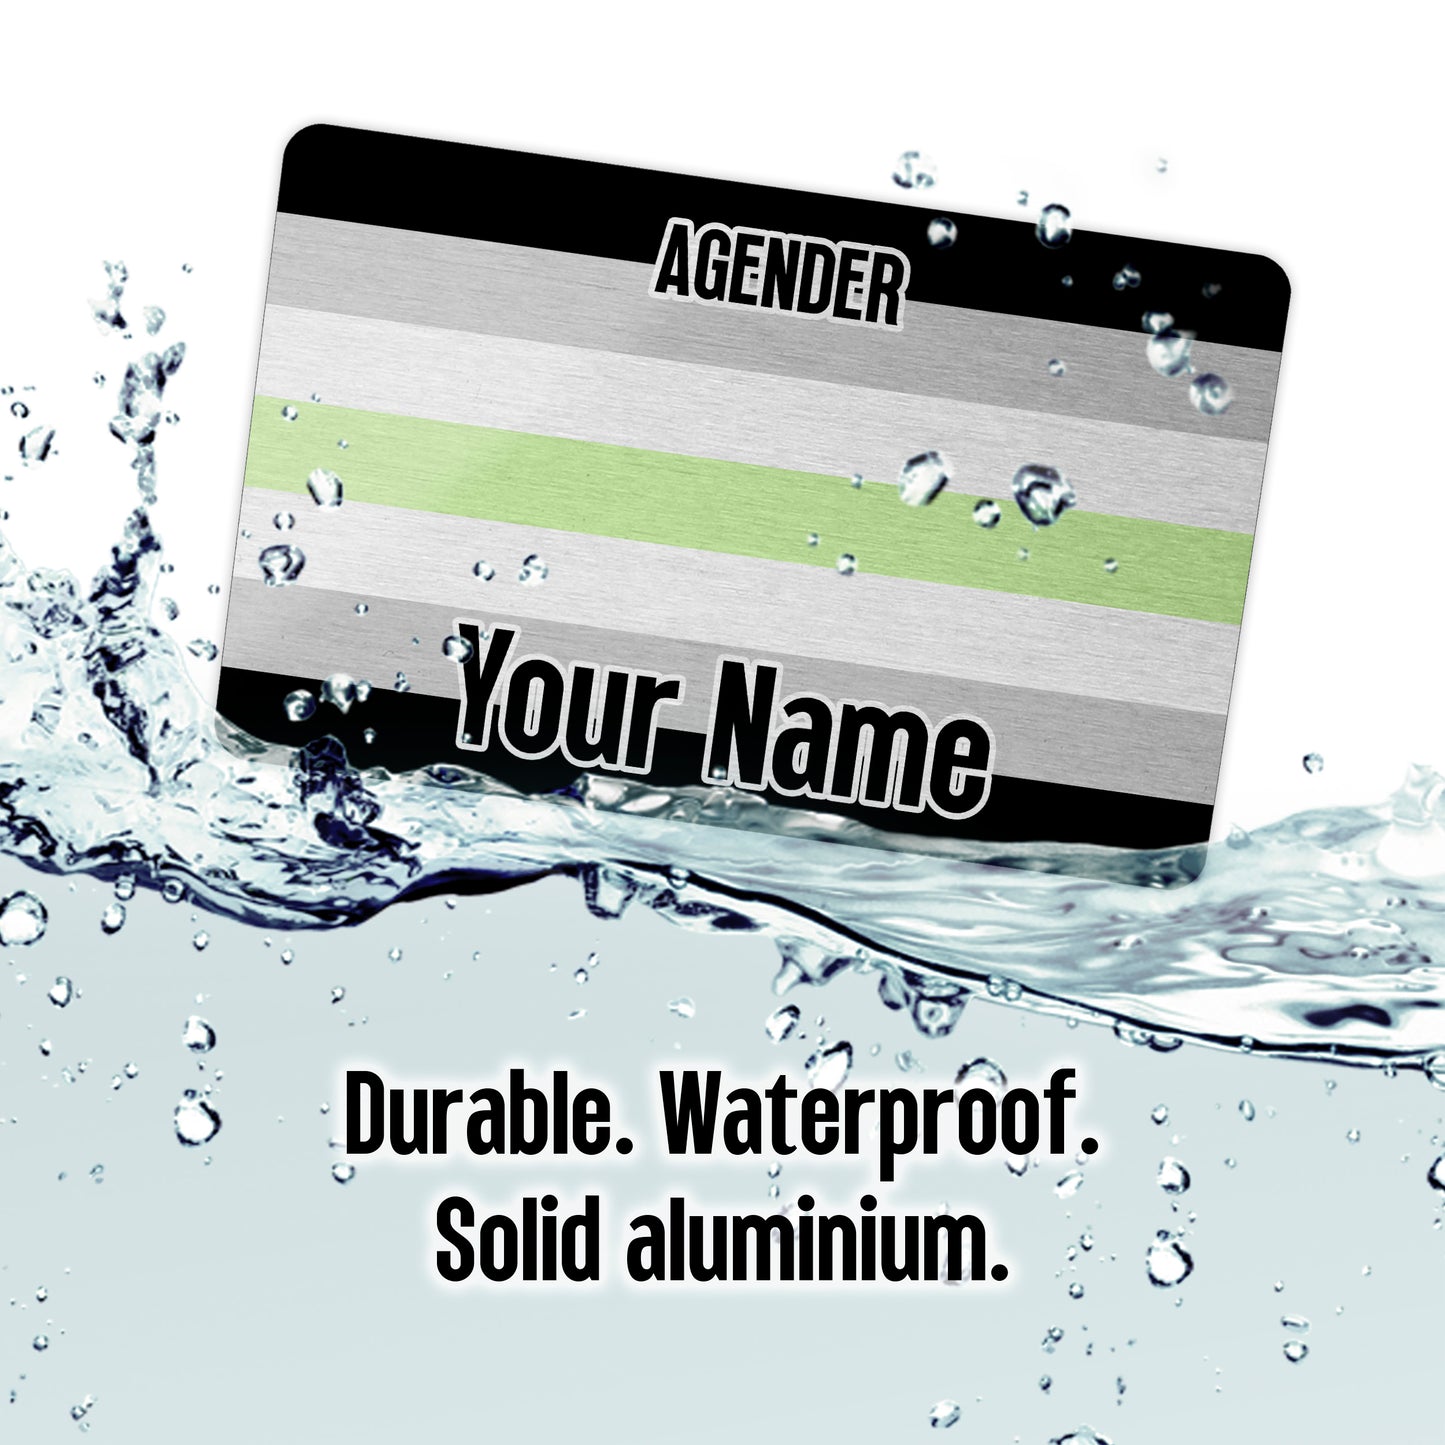 Aluminium Metal Wallet Card personalised with your name and the agender pride flag